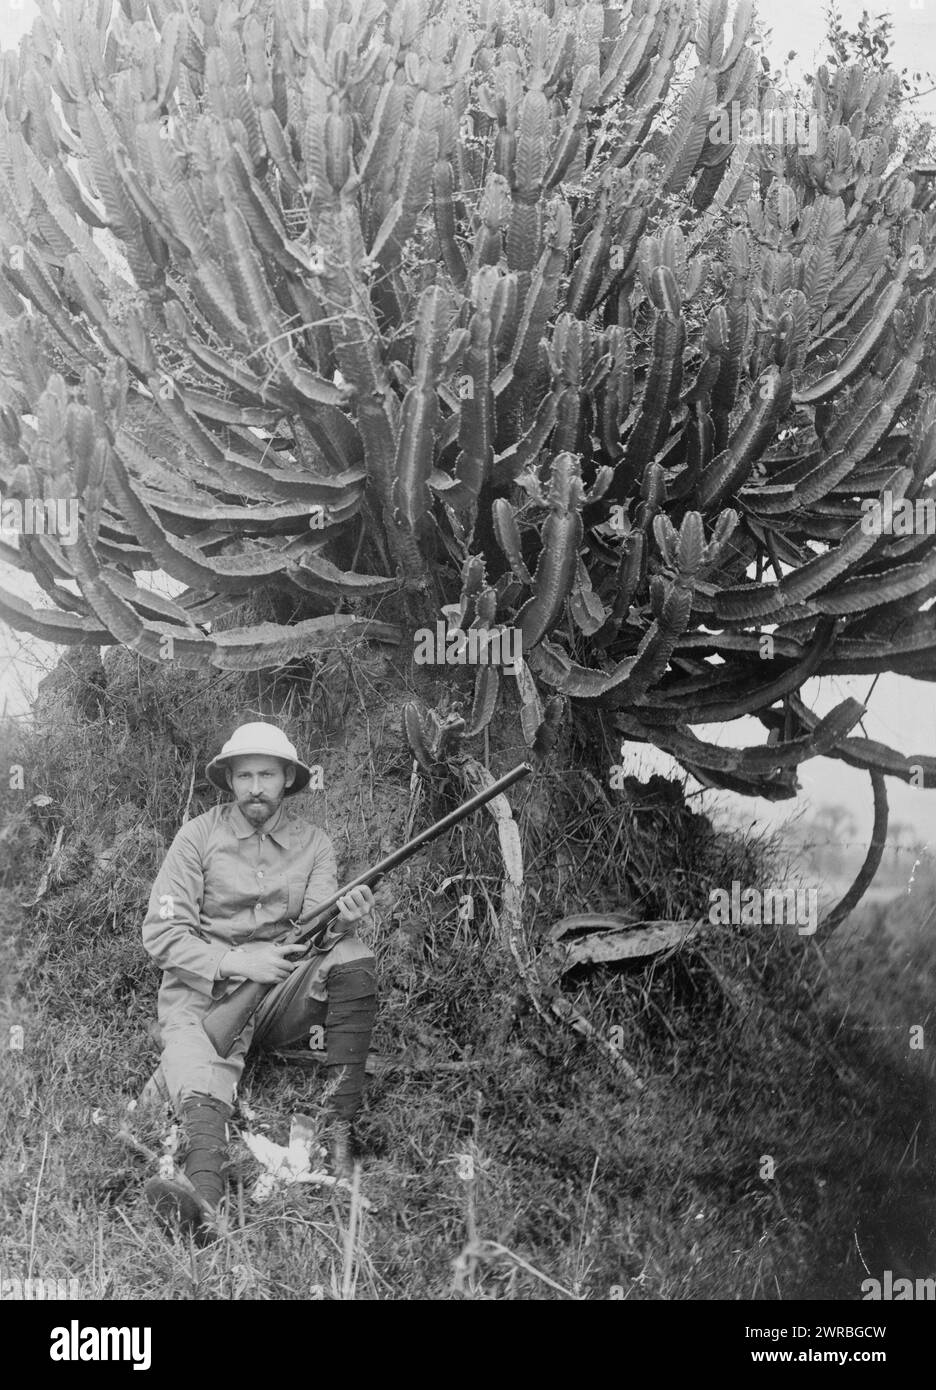 Africa, rubber tree, A man, possibly Homer L. Shantz, full-length portrait, holding a rifle, seated on the ground in front of a large rubber plant., between 1915 and 1923, Shantz, H. L., (Homer LeRoy), 1876-1958, Journeys, Africa, Photographic prints, 1910-1930., Portrait photographs, 1910-1930, Photographic prints, 1910-1930, 1 photographic print Stock Photo